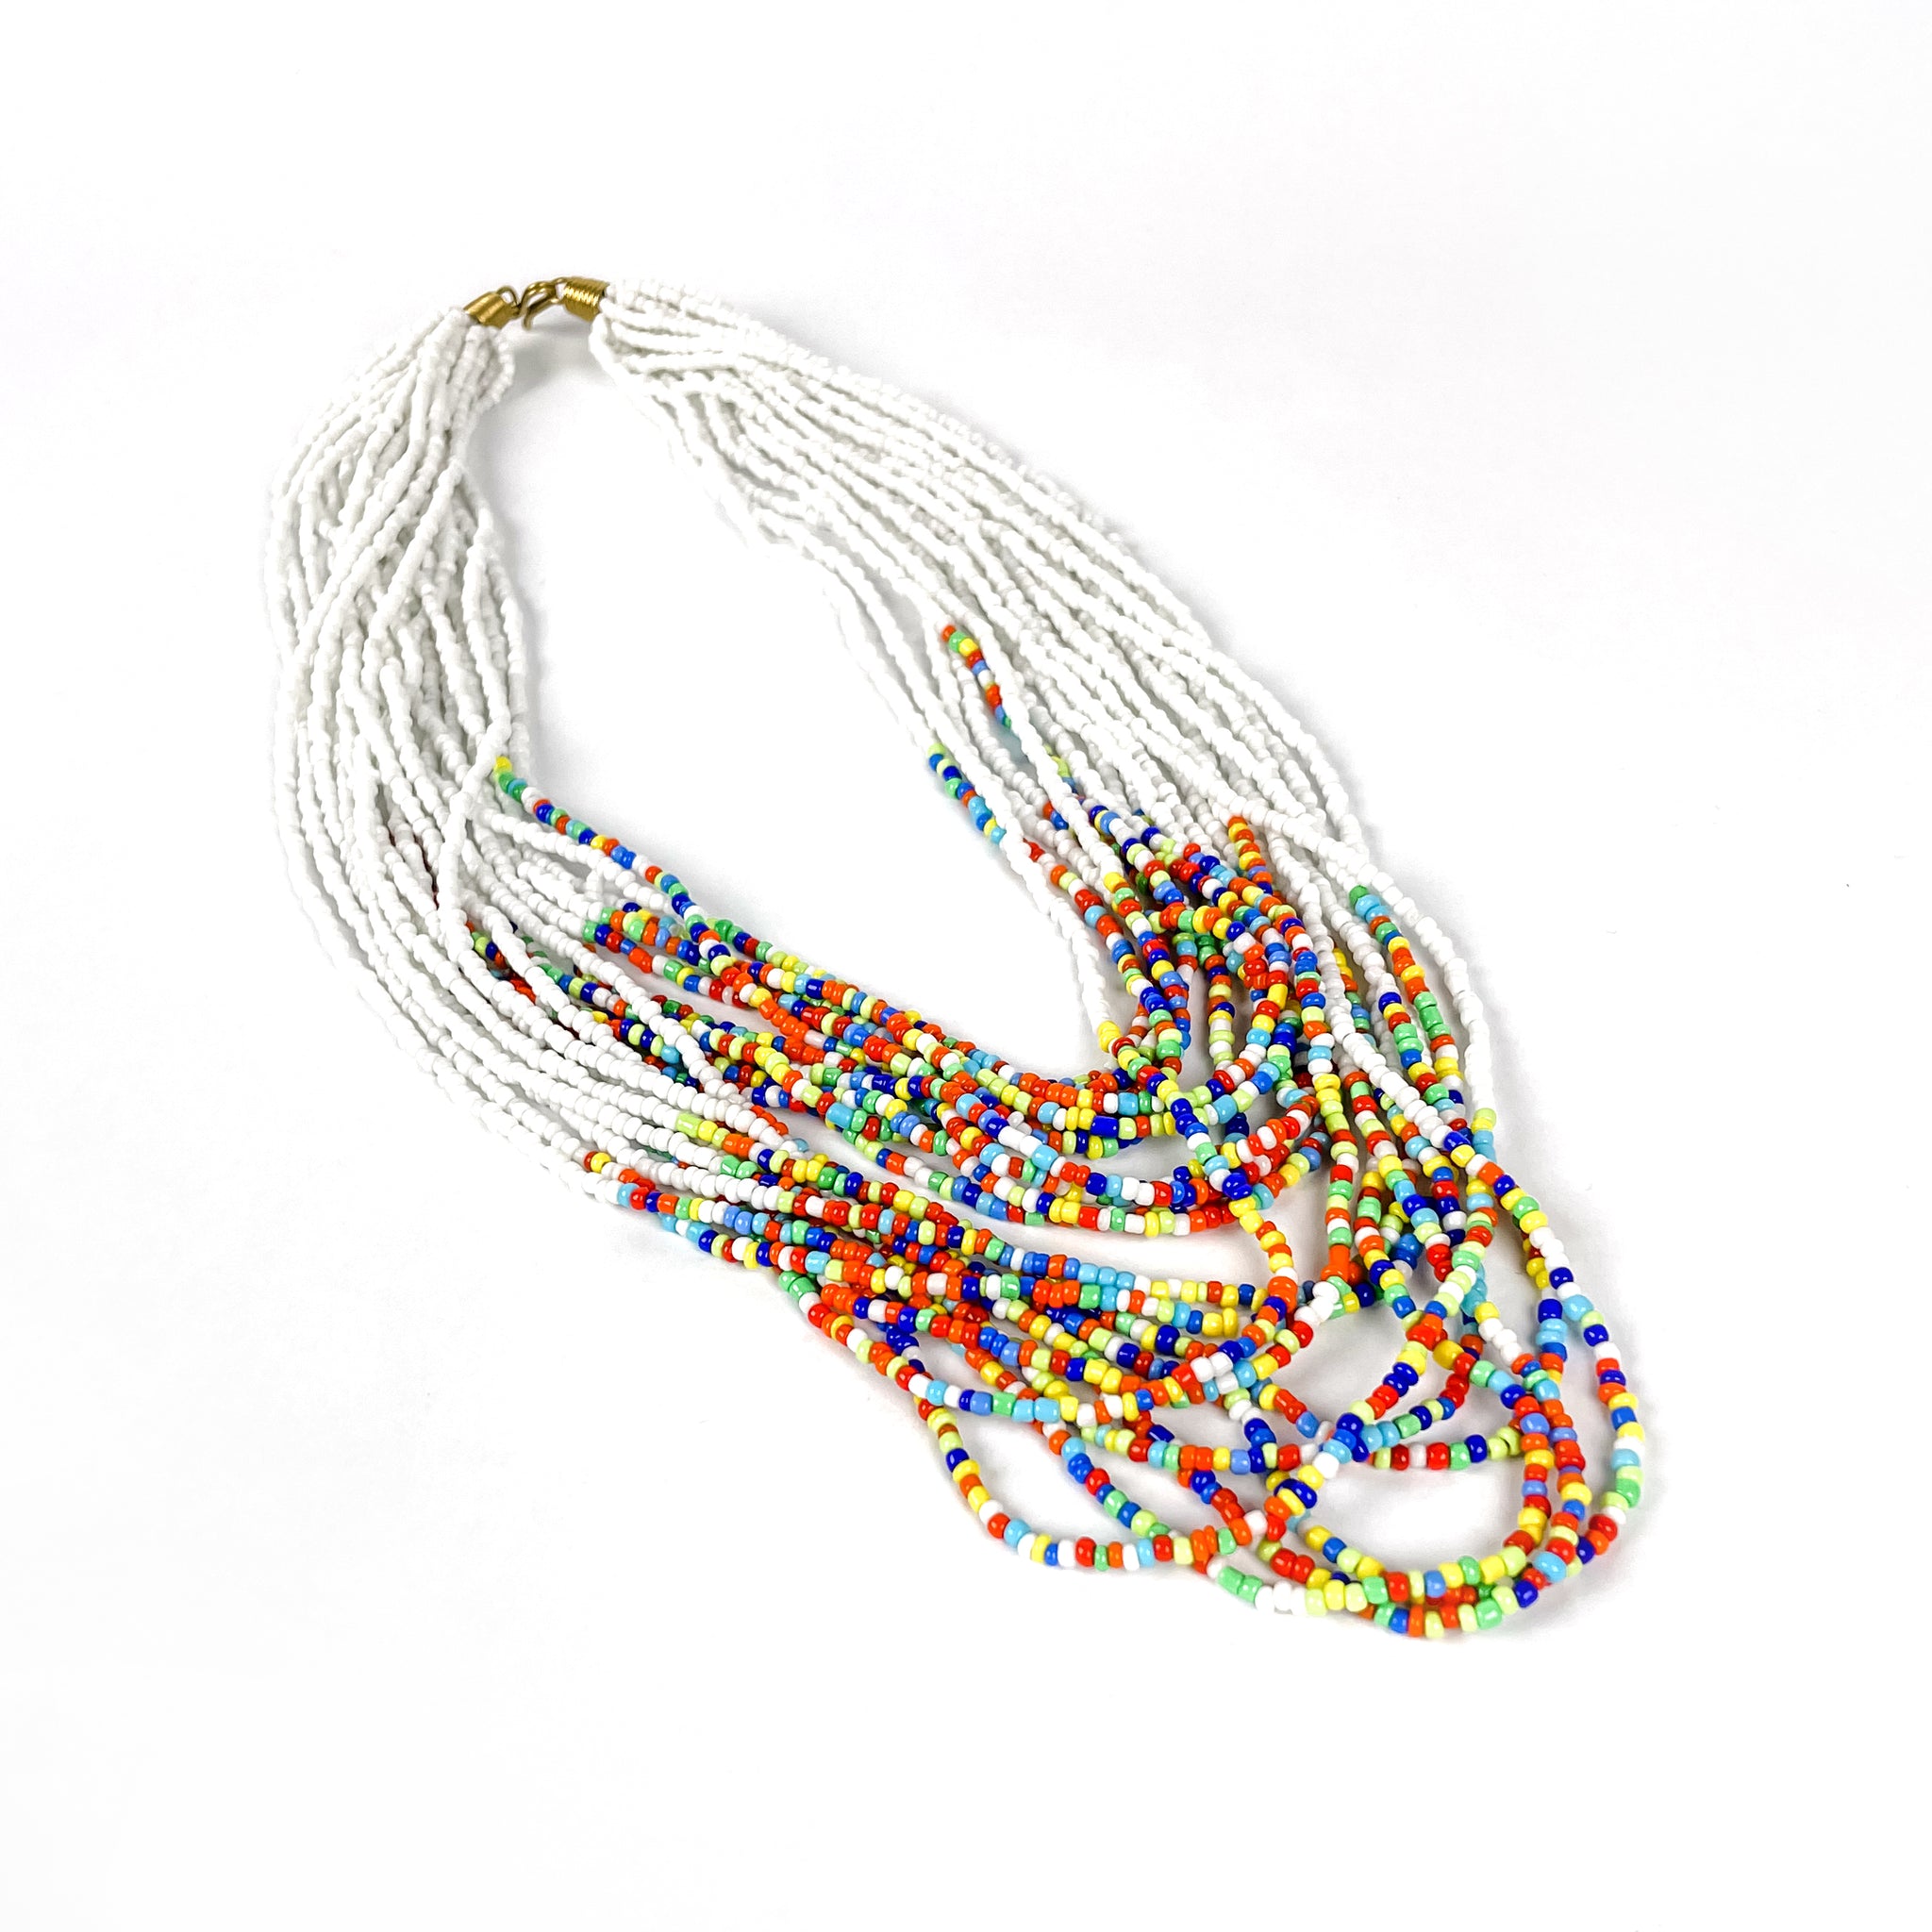 Buy the Multi Colored Polymer Necklace | JaeBee Jewelry